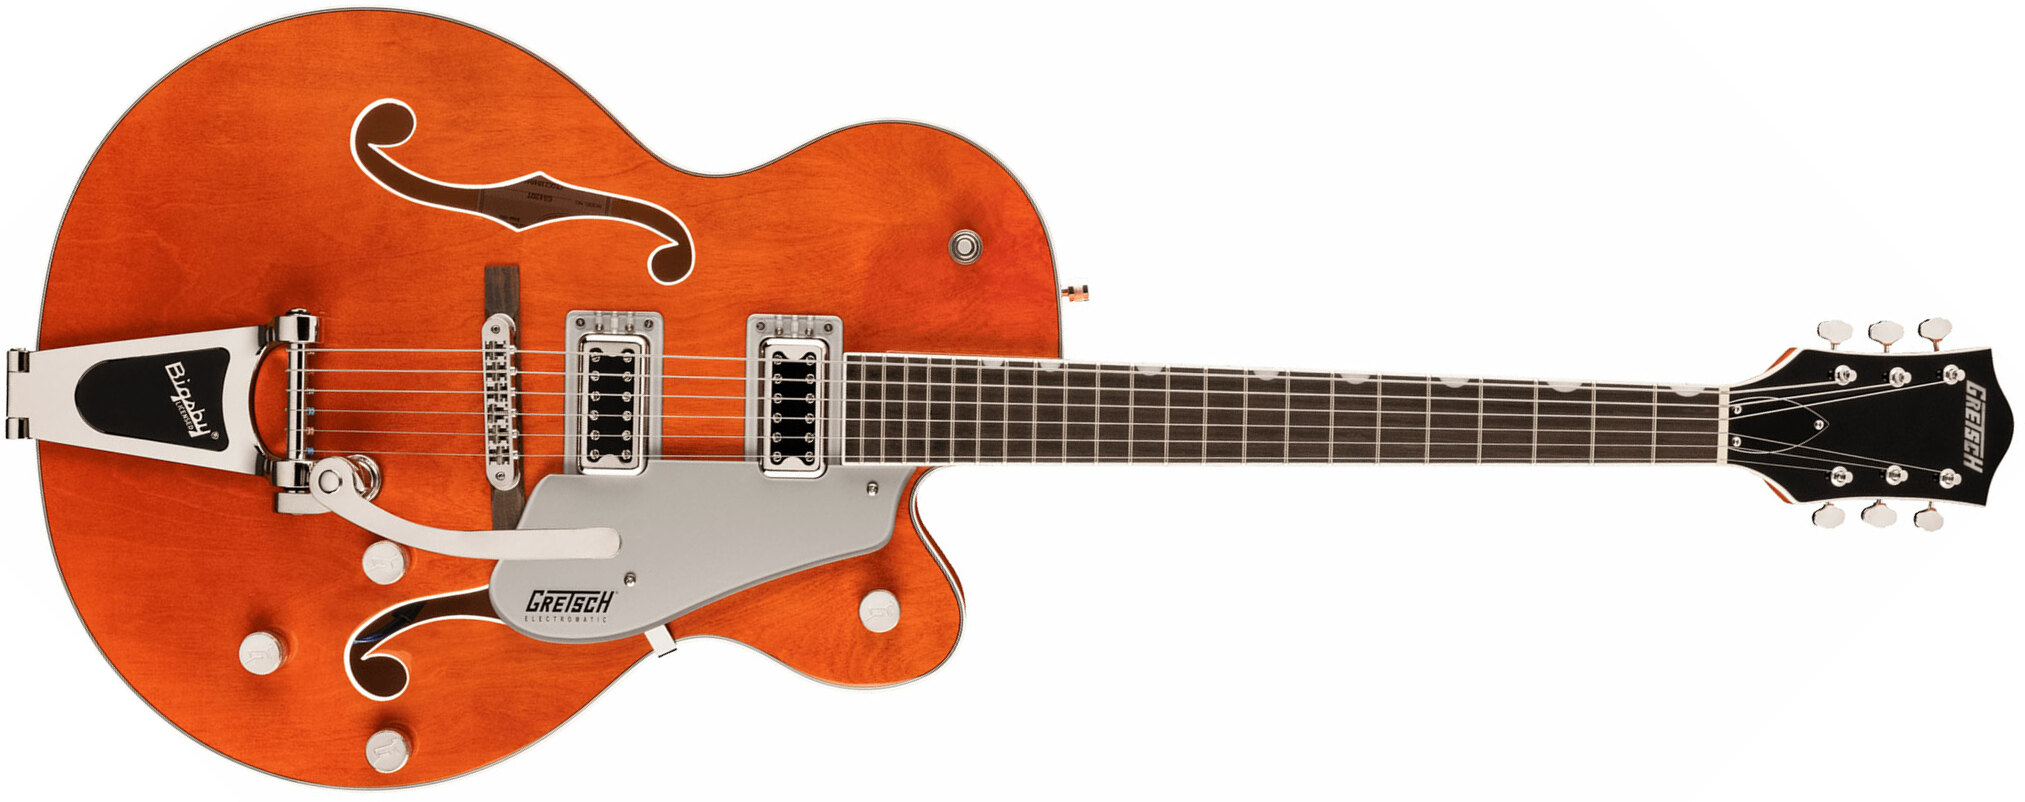 Gretsch G5420t Classic Electromatic Hollow Body Hh Trem Bigsby Lau - Orange Stain - Semi-hollow electric guitar - Main picture